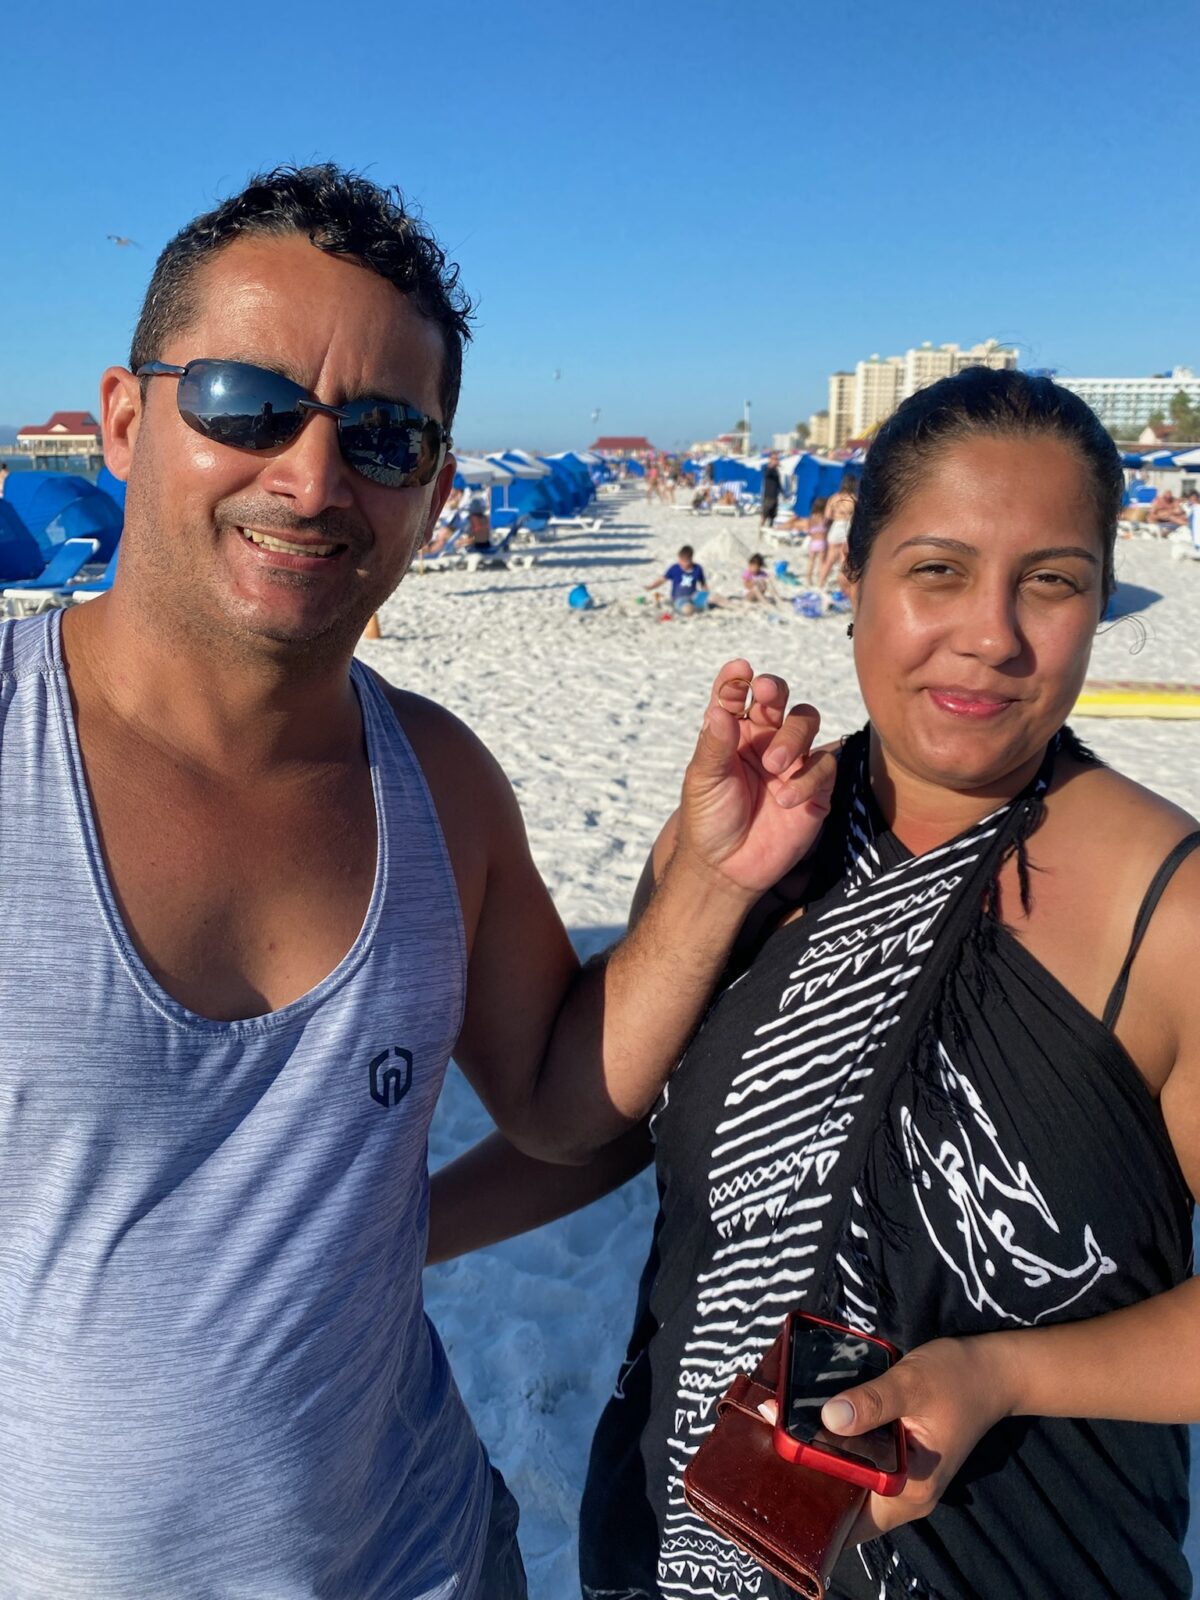 Ring Lost On Clearwater Beach, Recovered By SRARC